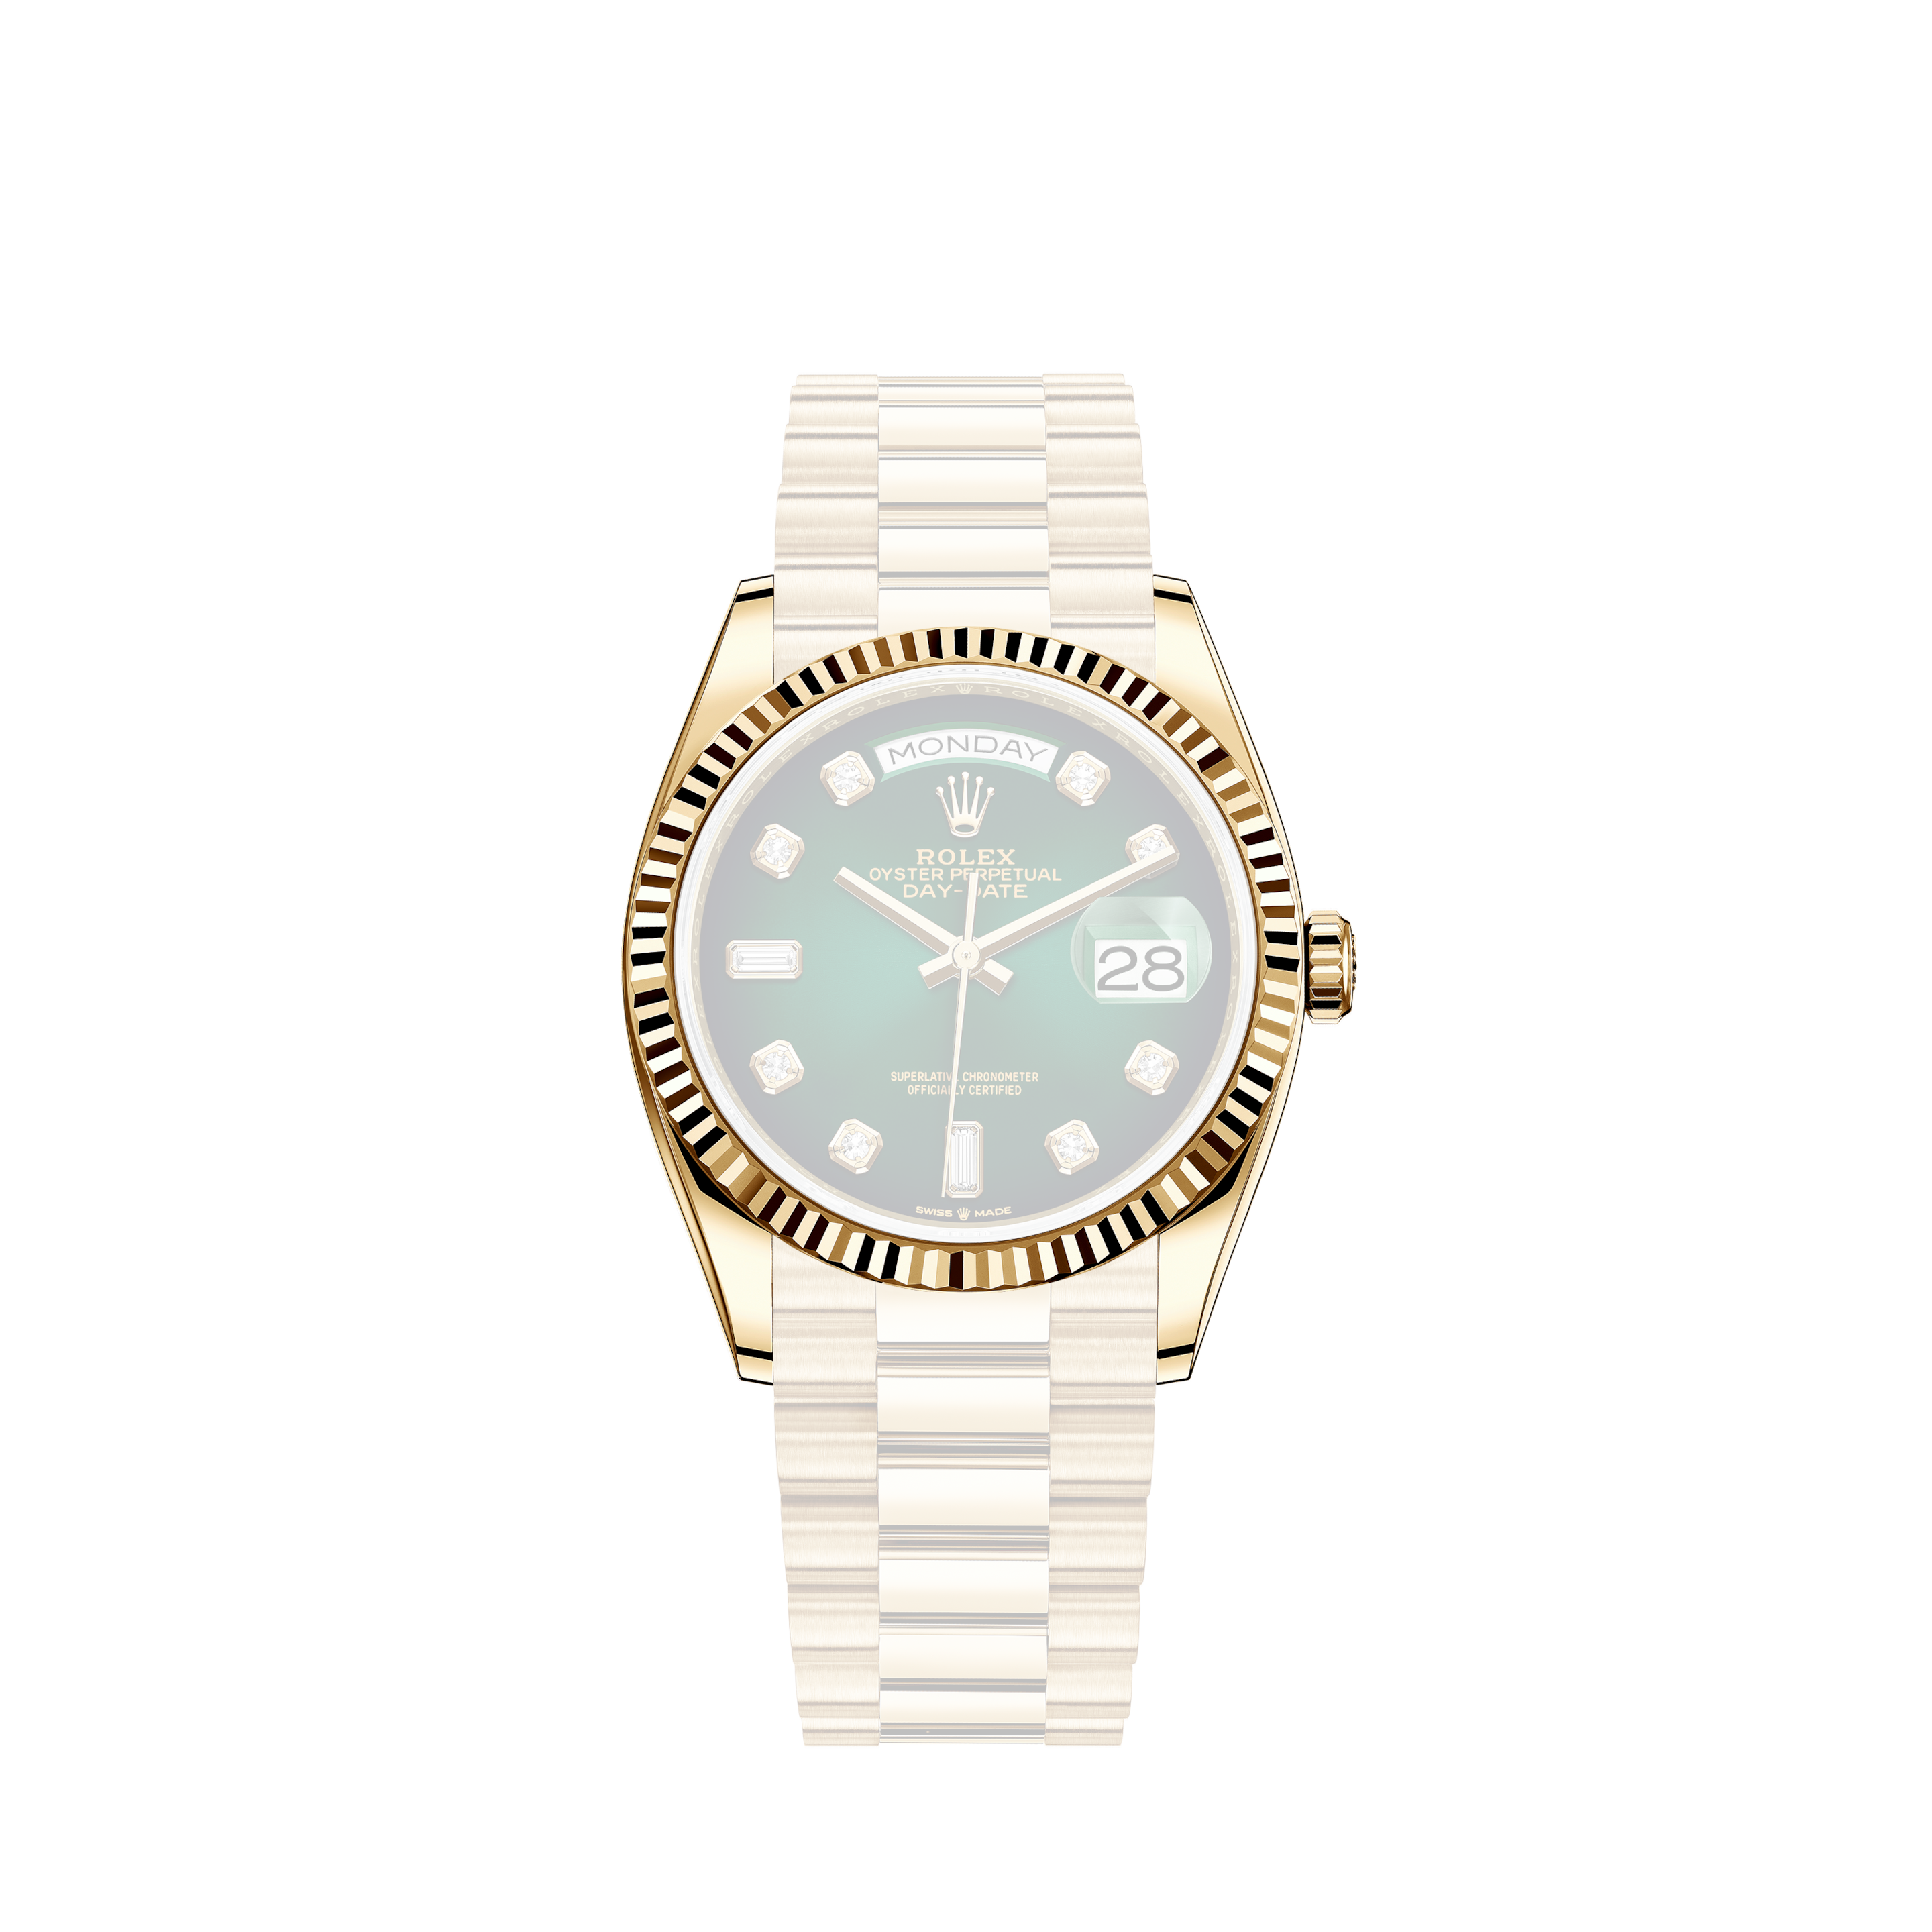 Rolex Submariner Date New 2020 41 mm Ref. 126610LVRolex Oyster Perpetual Ref 1002